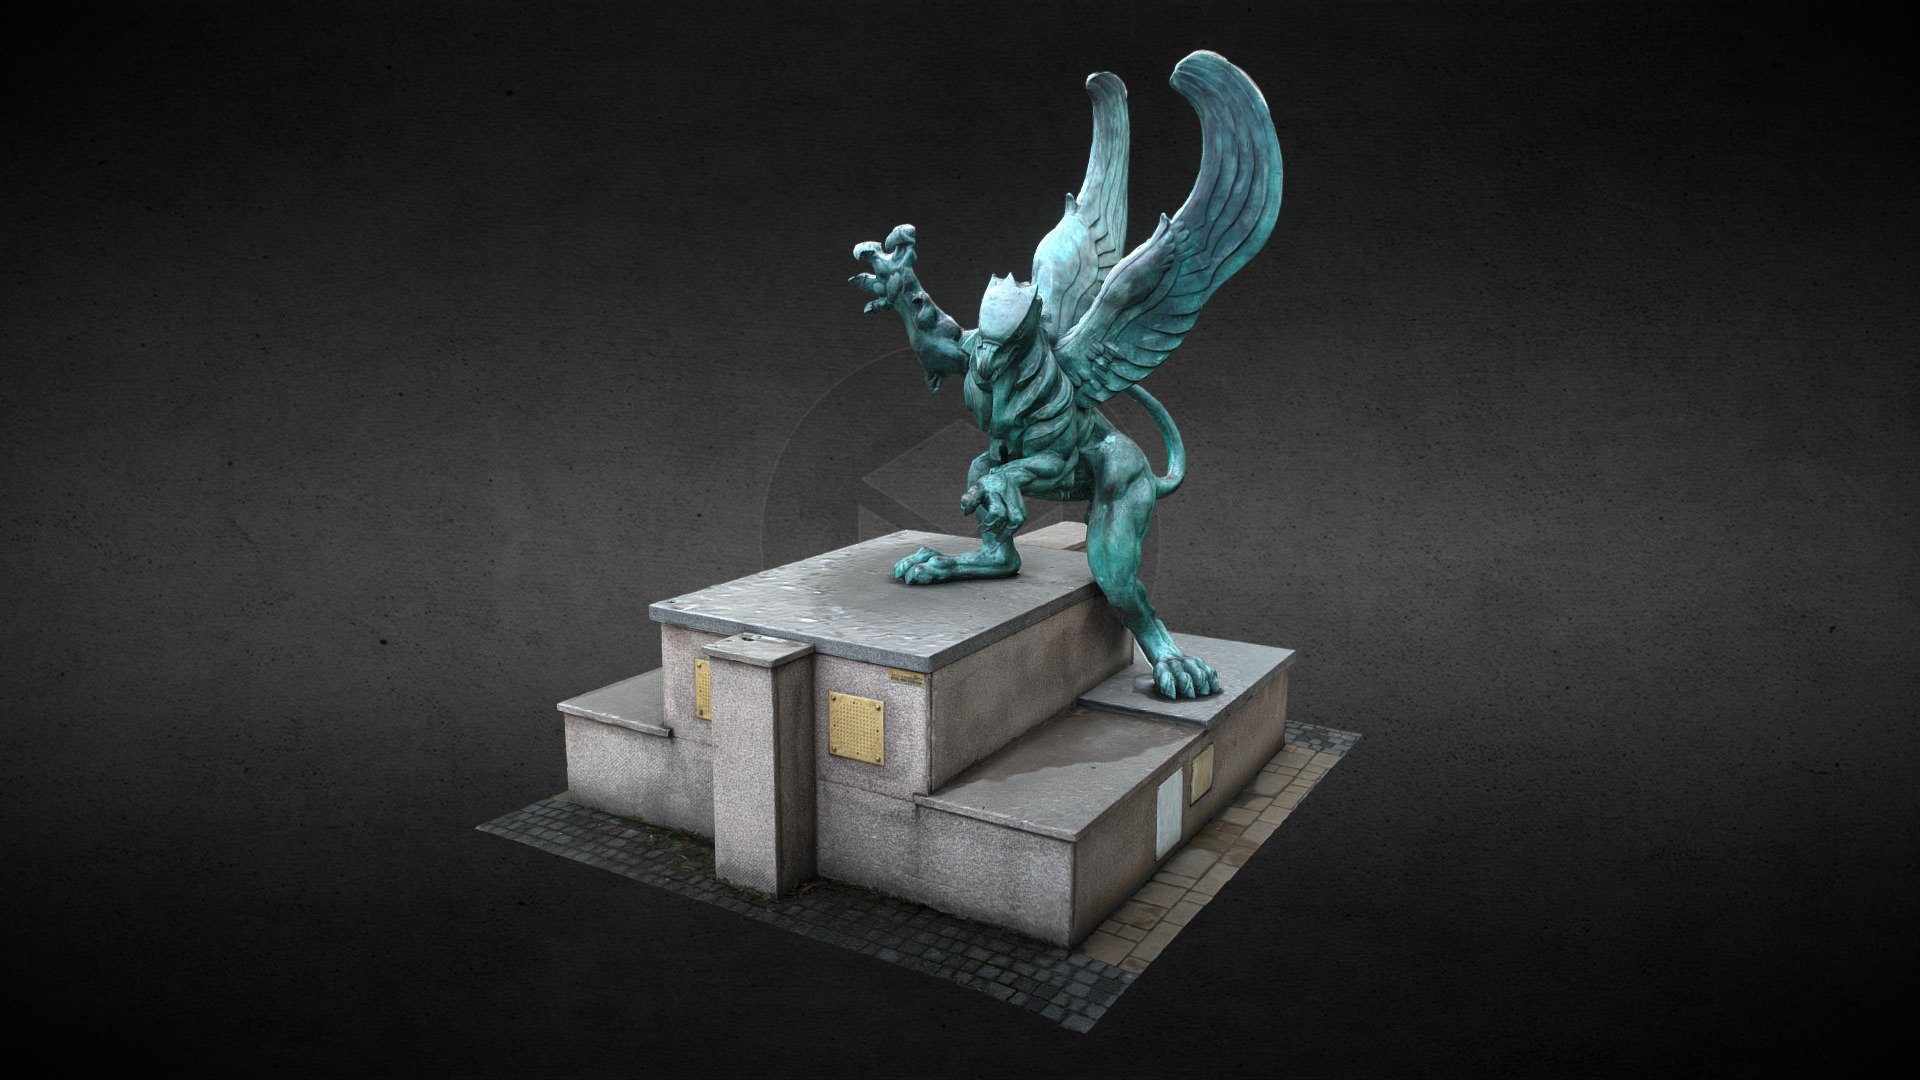 A photogrammetry model of Griffin statue in Mielec. Original authors of the statue are Agnieszka Świerzowicz and Marek Maślaniec 3d model